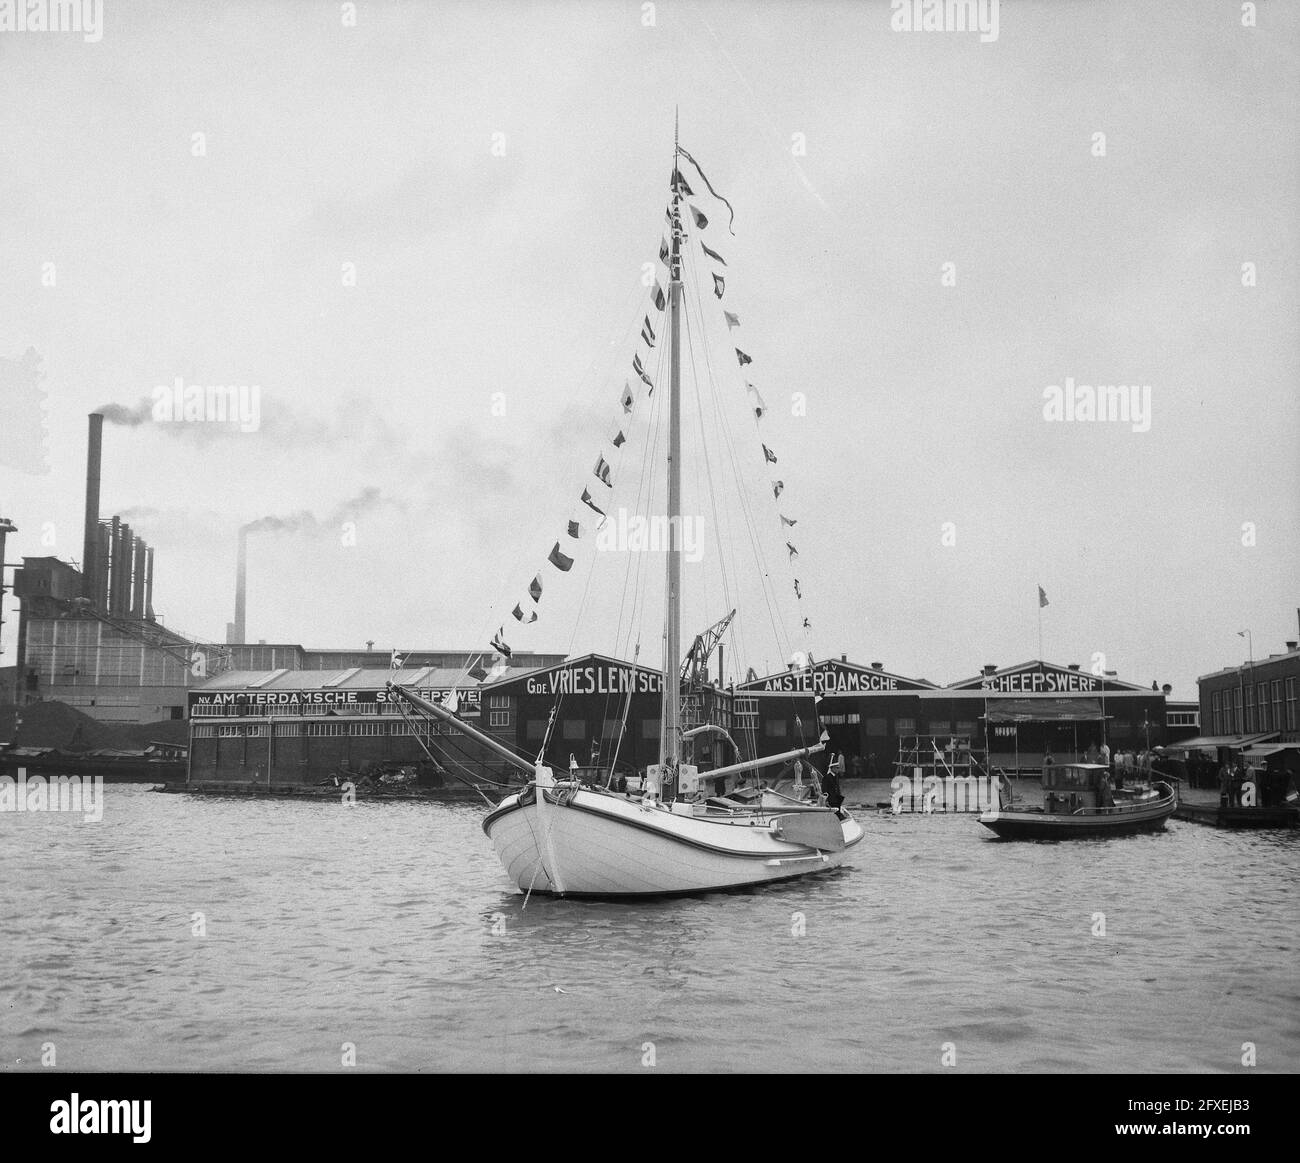 De vries amsterdam Black and White Stock Photos & Images - Page 2 - Alamy